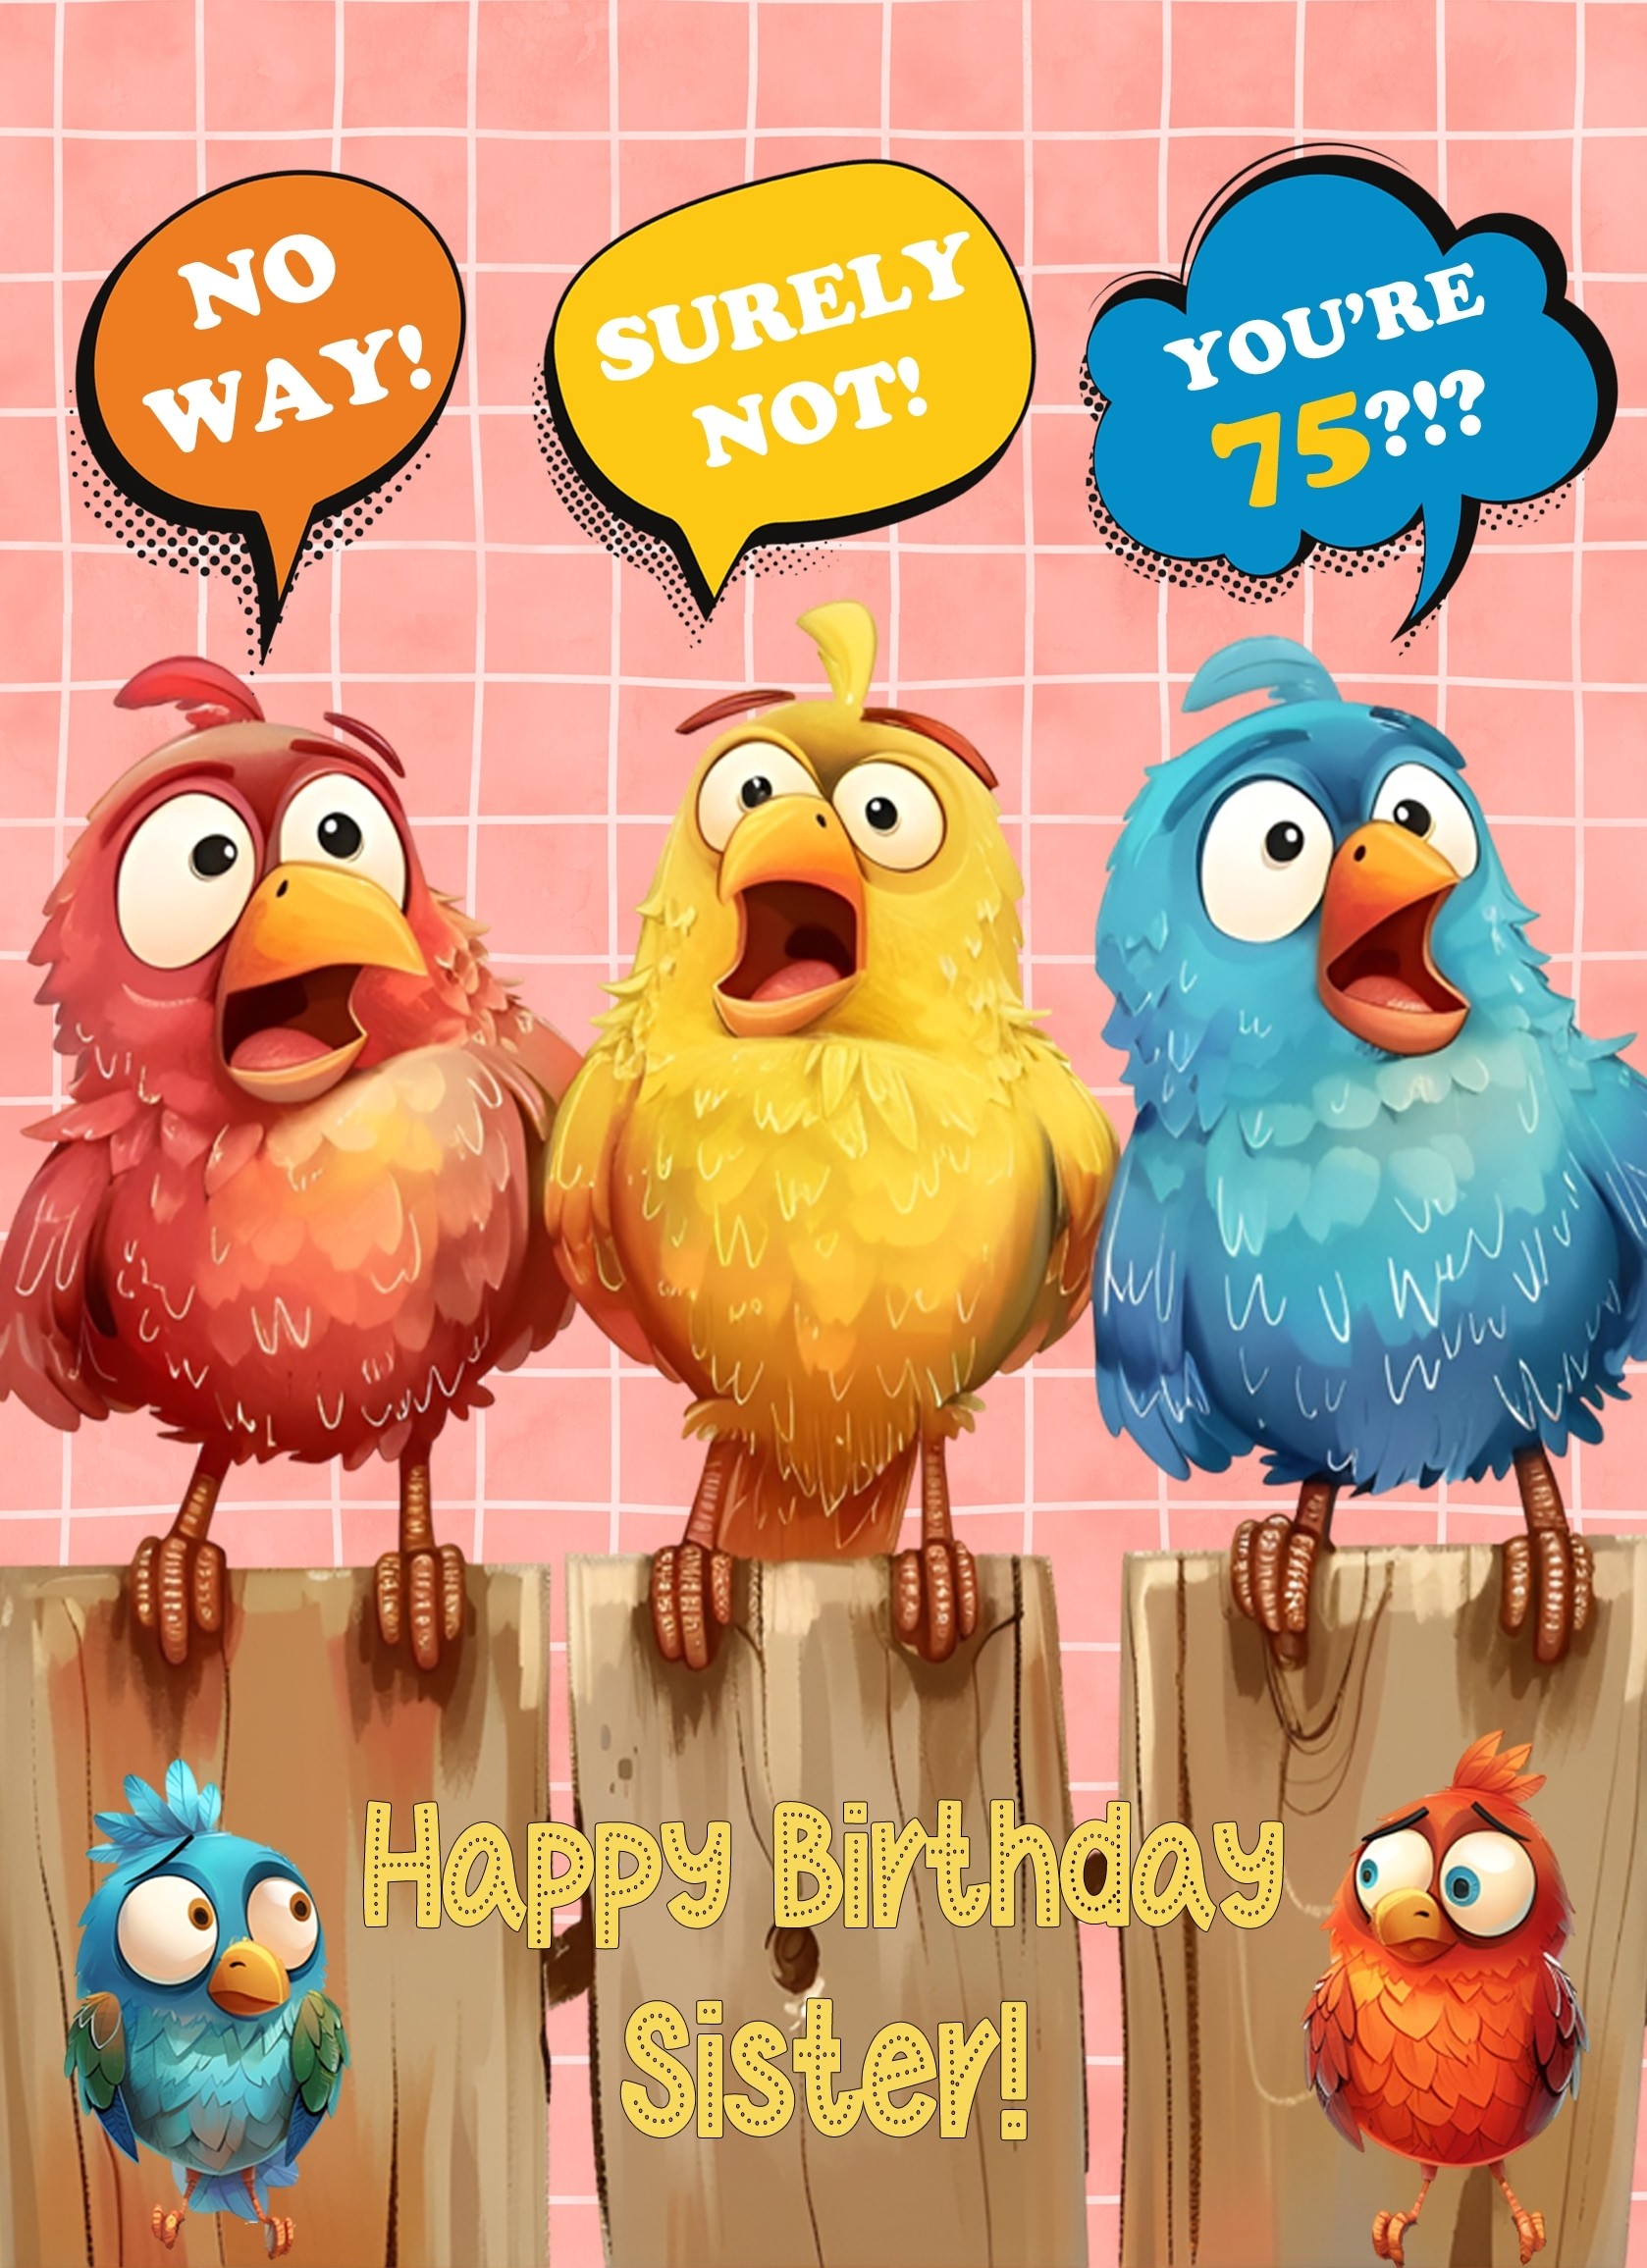 Sister 75th Birthday Card (Funny Birds Surprised)